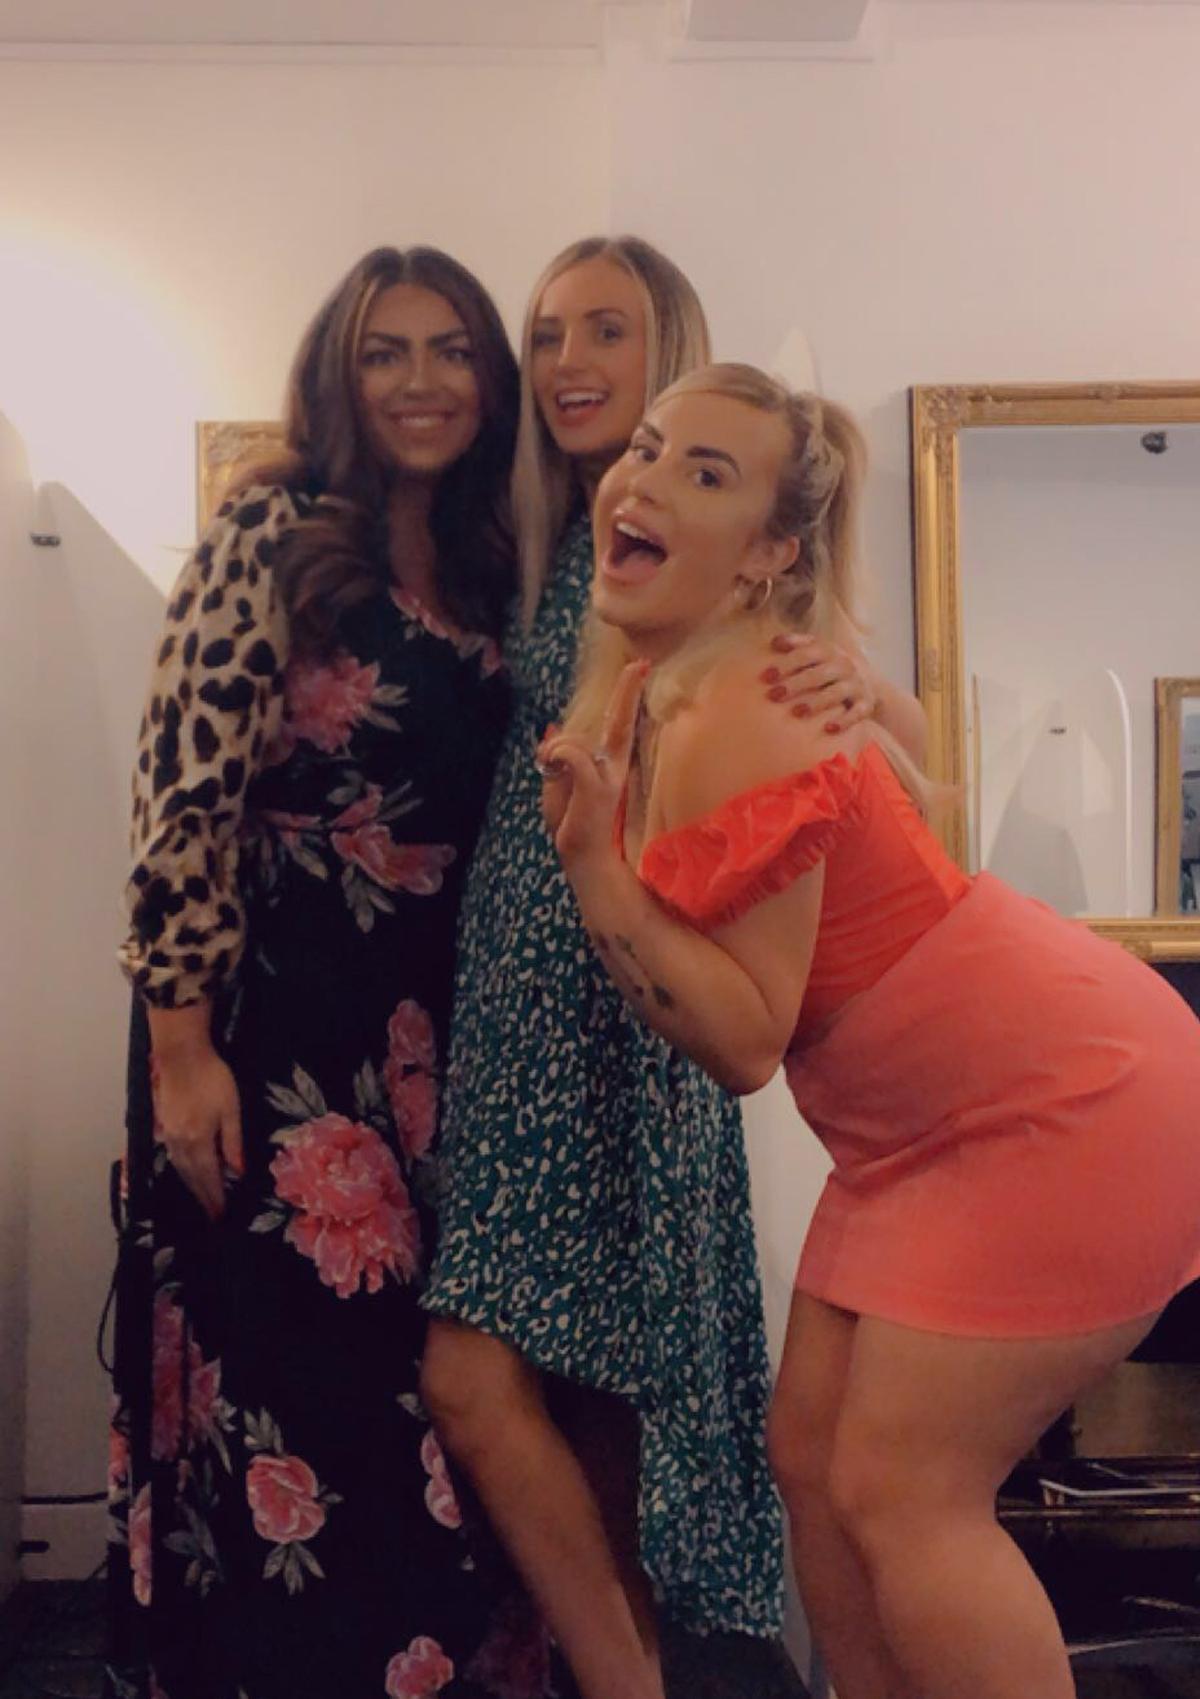 Tayla Wright with some friends her own age. (Caters News)